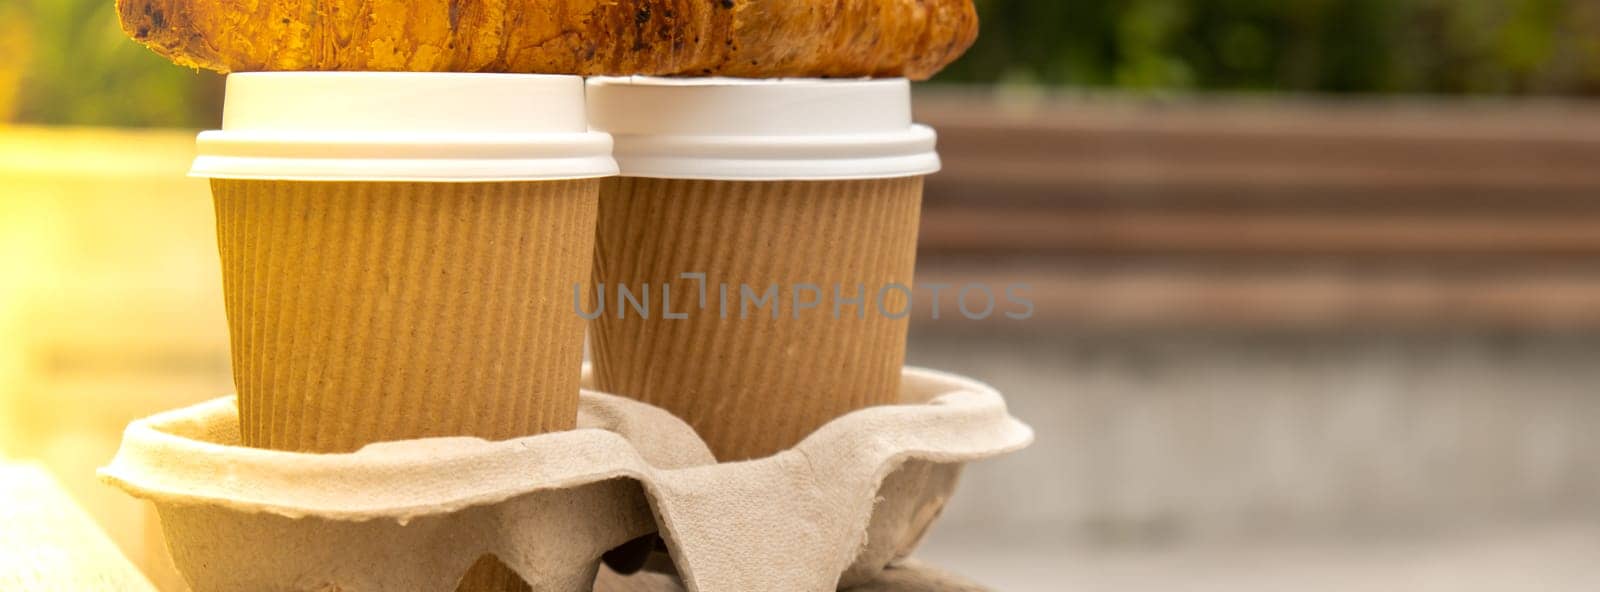 Fresh baked chocolate croissant on Two paper cups with lid for tea to go. Breakfast Coffee take away on the table. Take-out coffees with brown paper cup holder. Brown safety cardboard collars. Take away box for cups. Cardboard tray